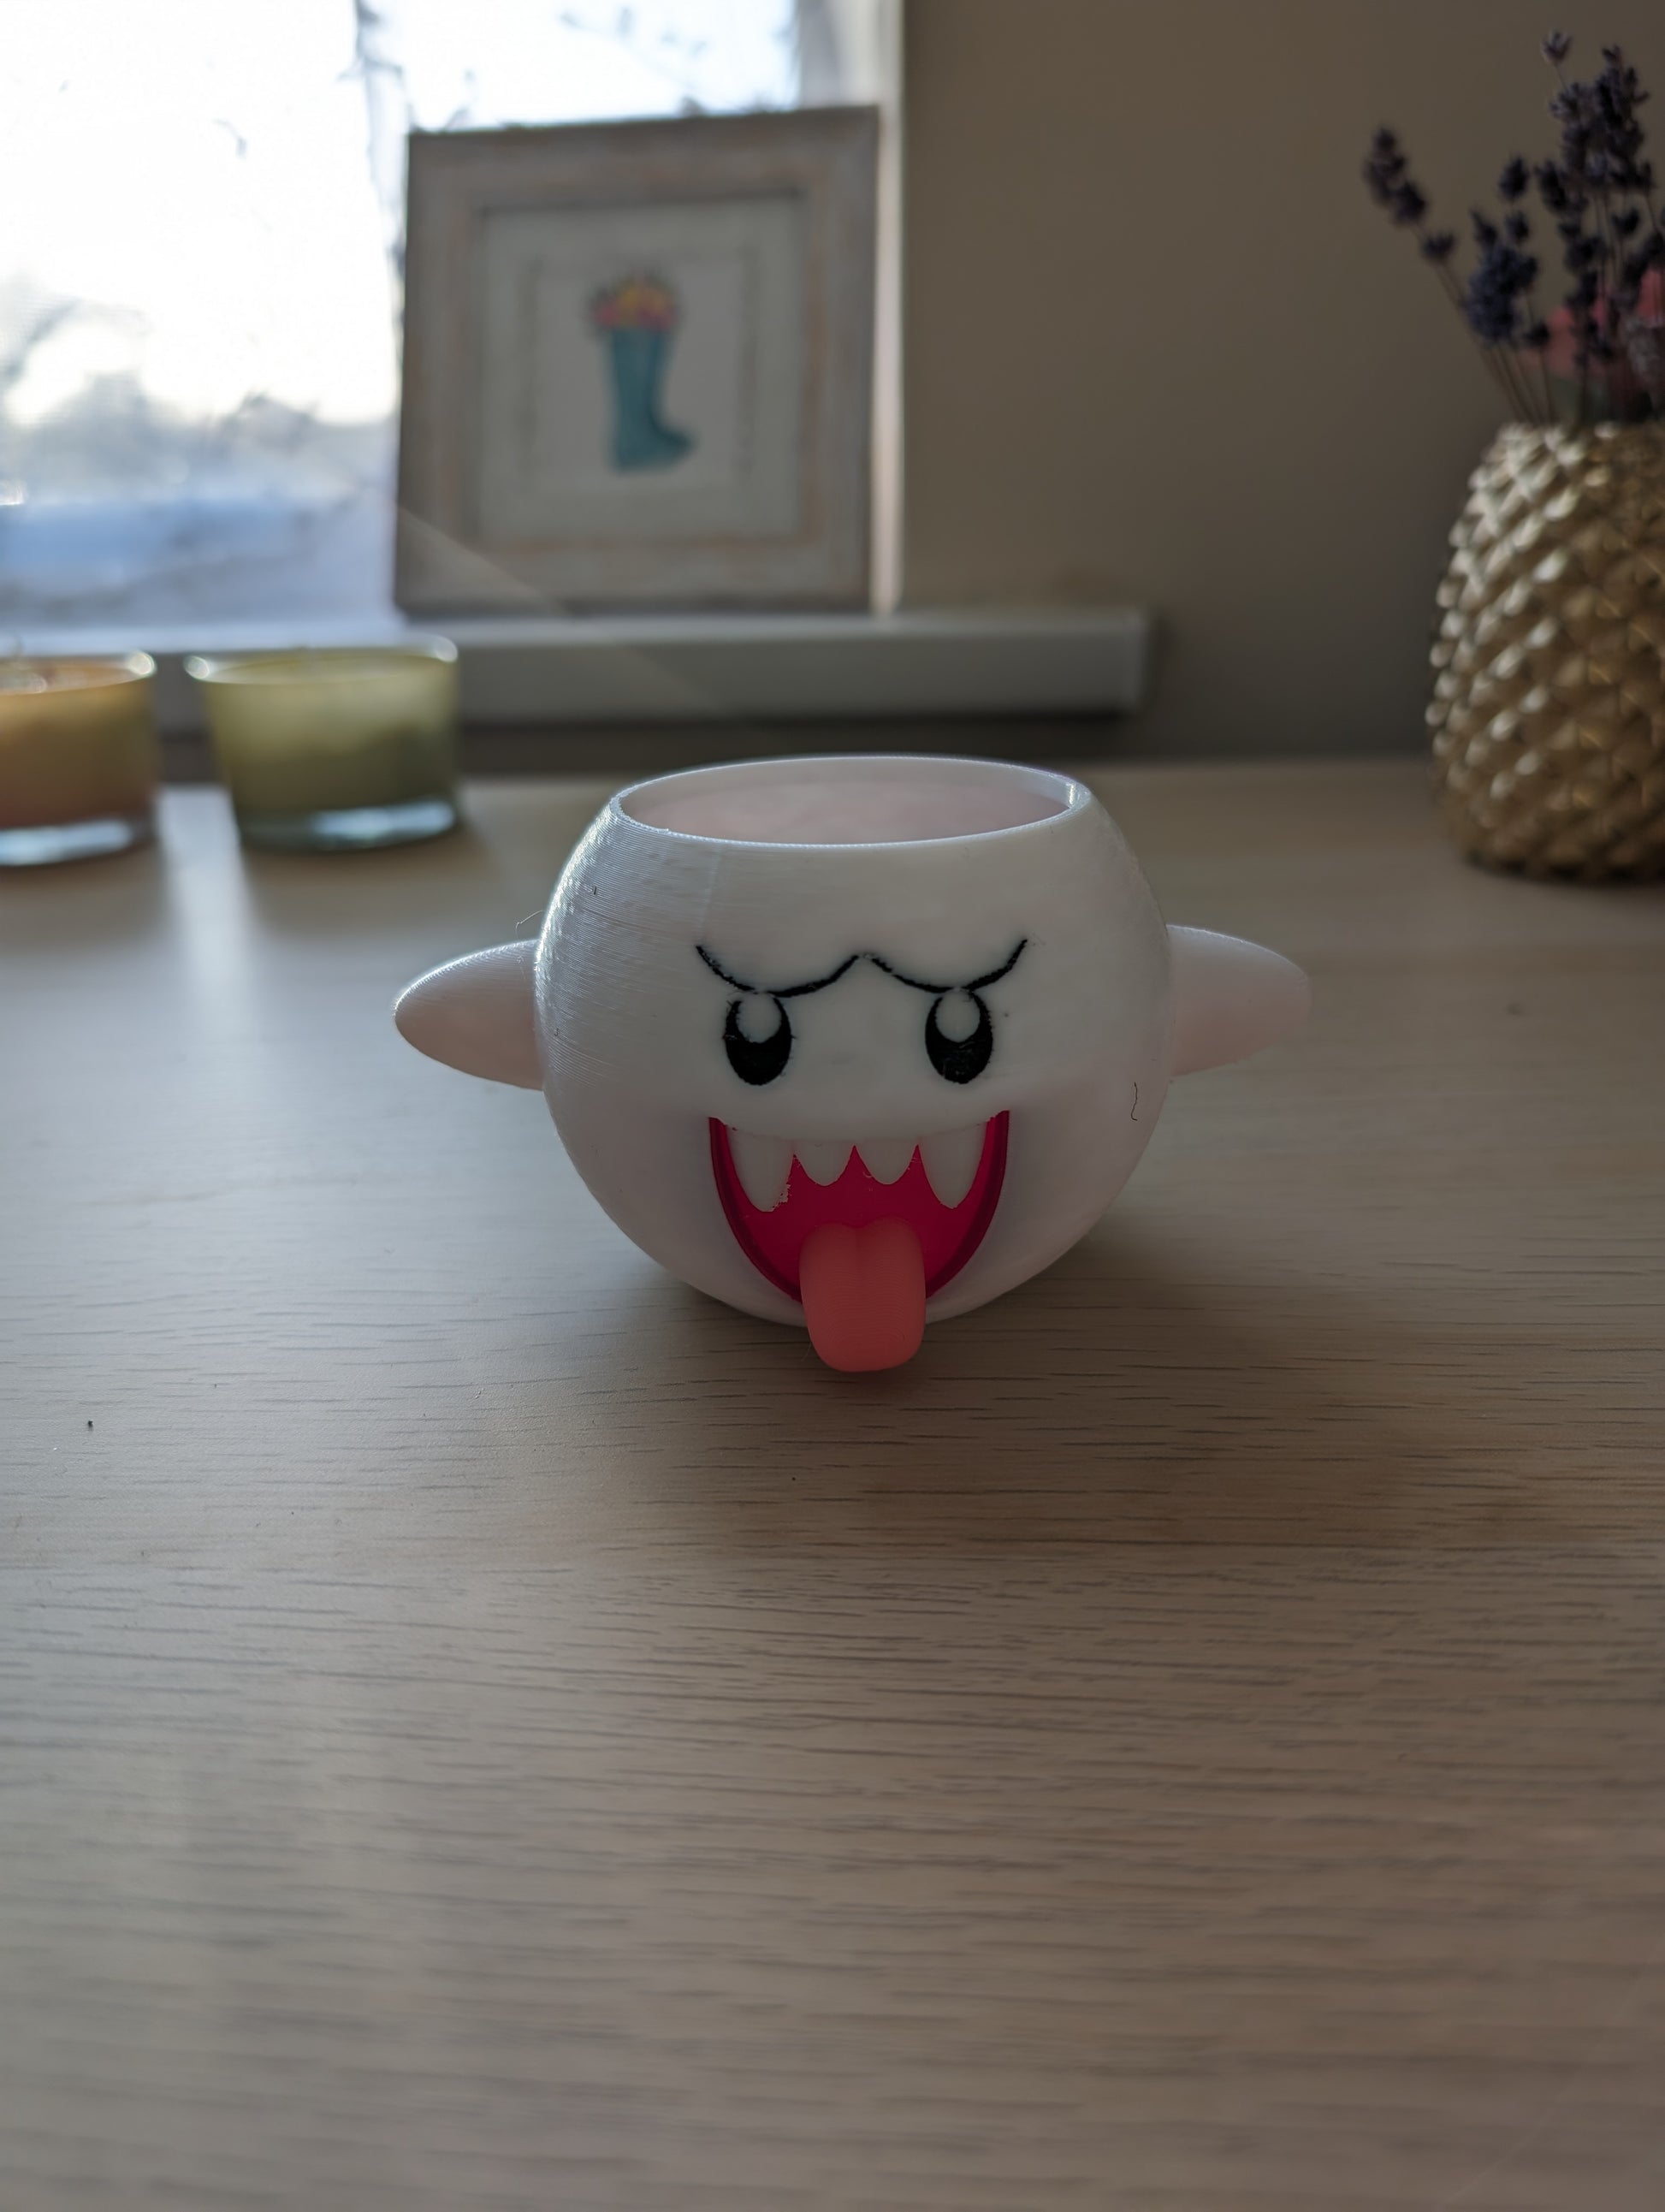 Mario Boo planter from the front